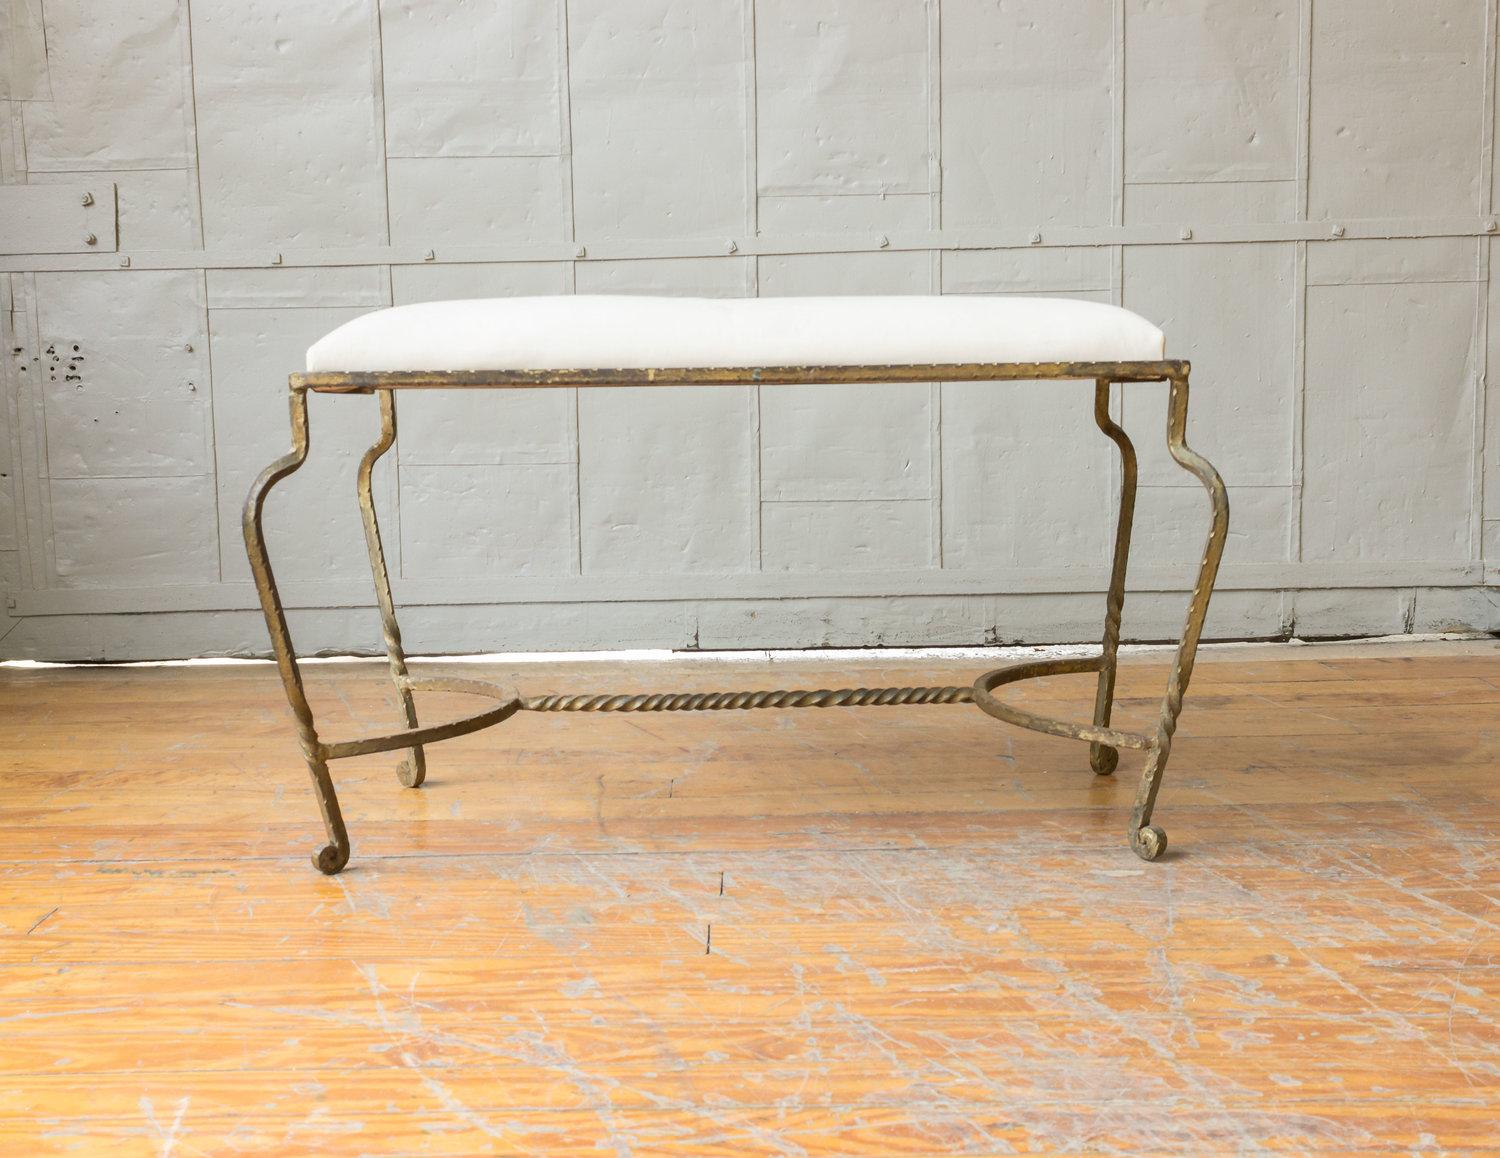 Patinated gilt iron bench upholstered in white muslin. Spanish, 1950s. Very good vintage condition.